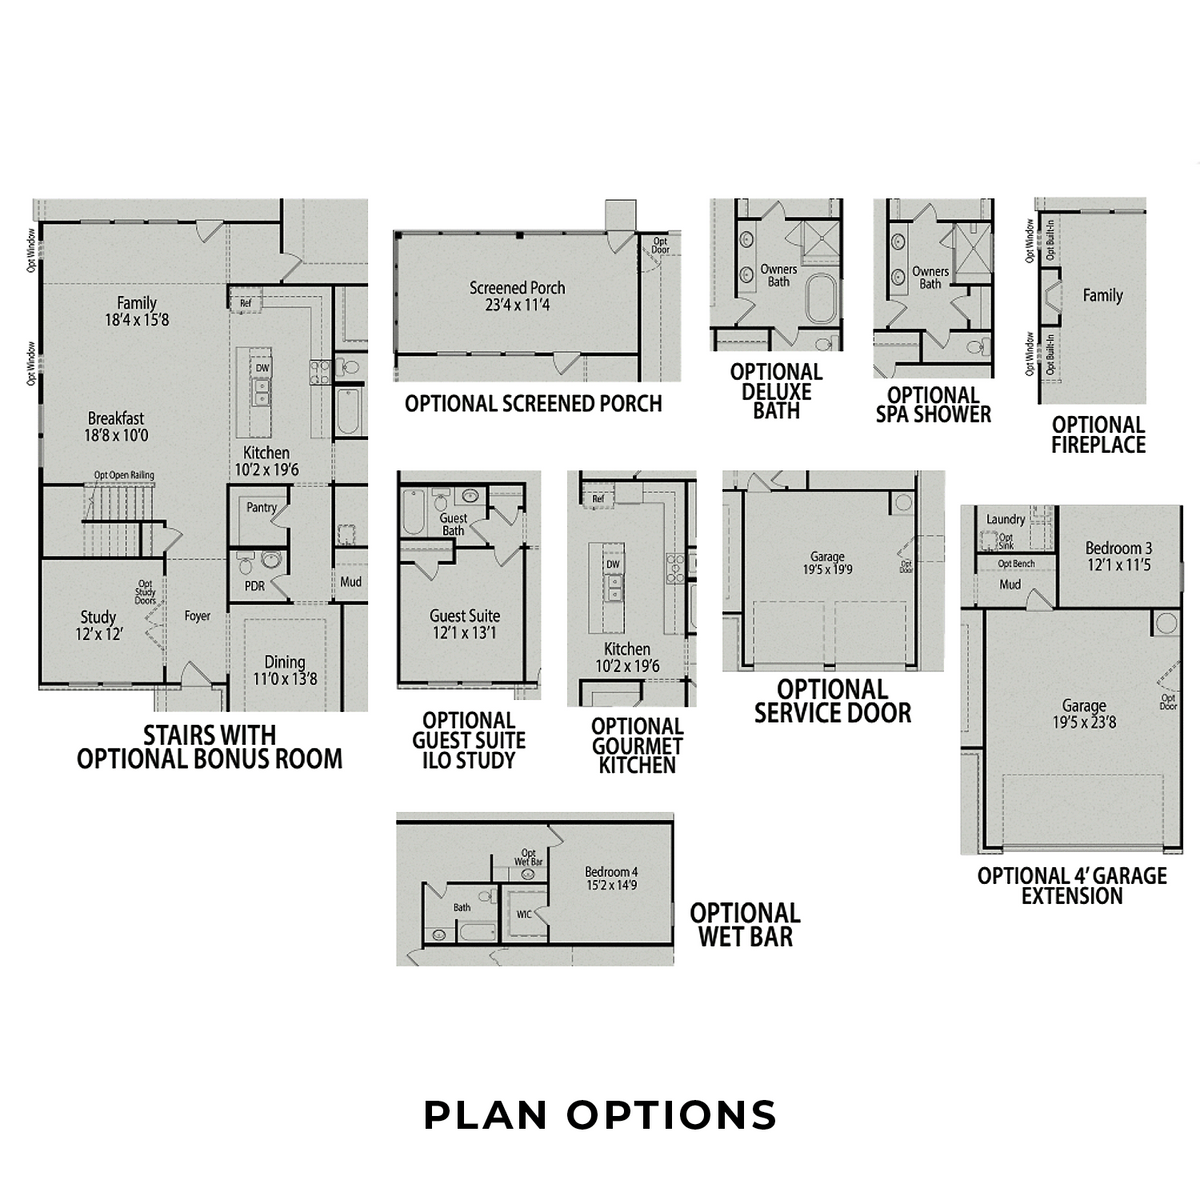 3 - The Magnolia A buildable floor plan layout in Davidson Homes' Tobacco Road community.